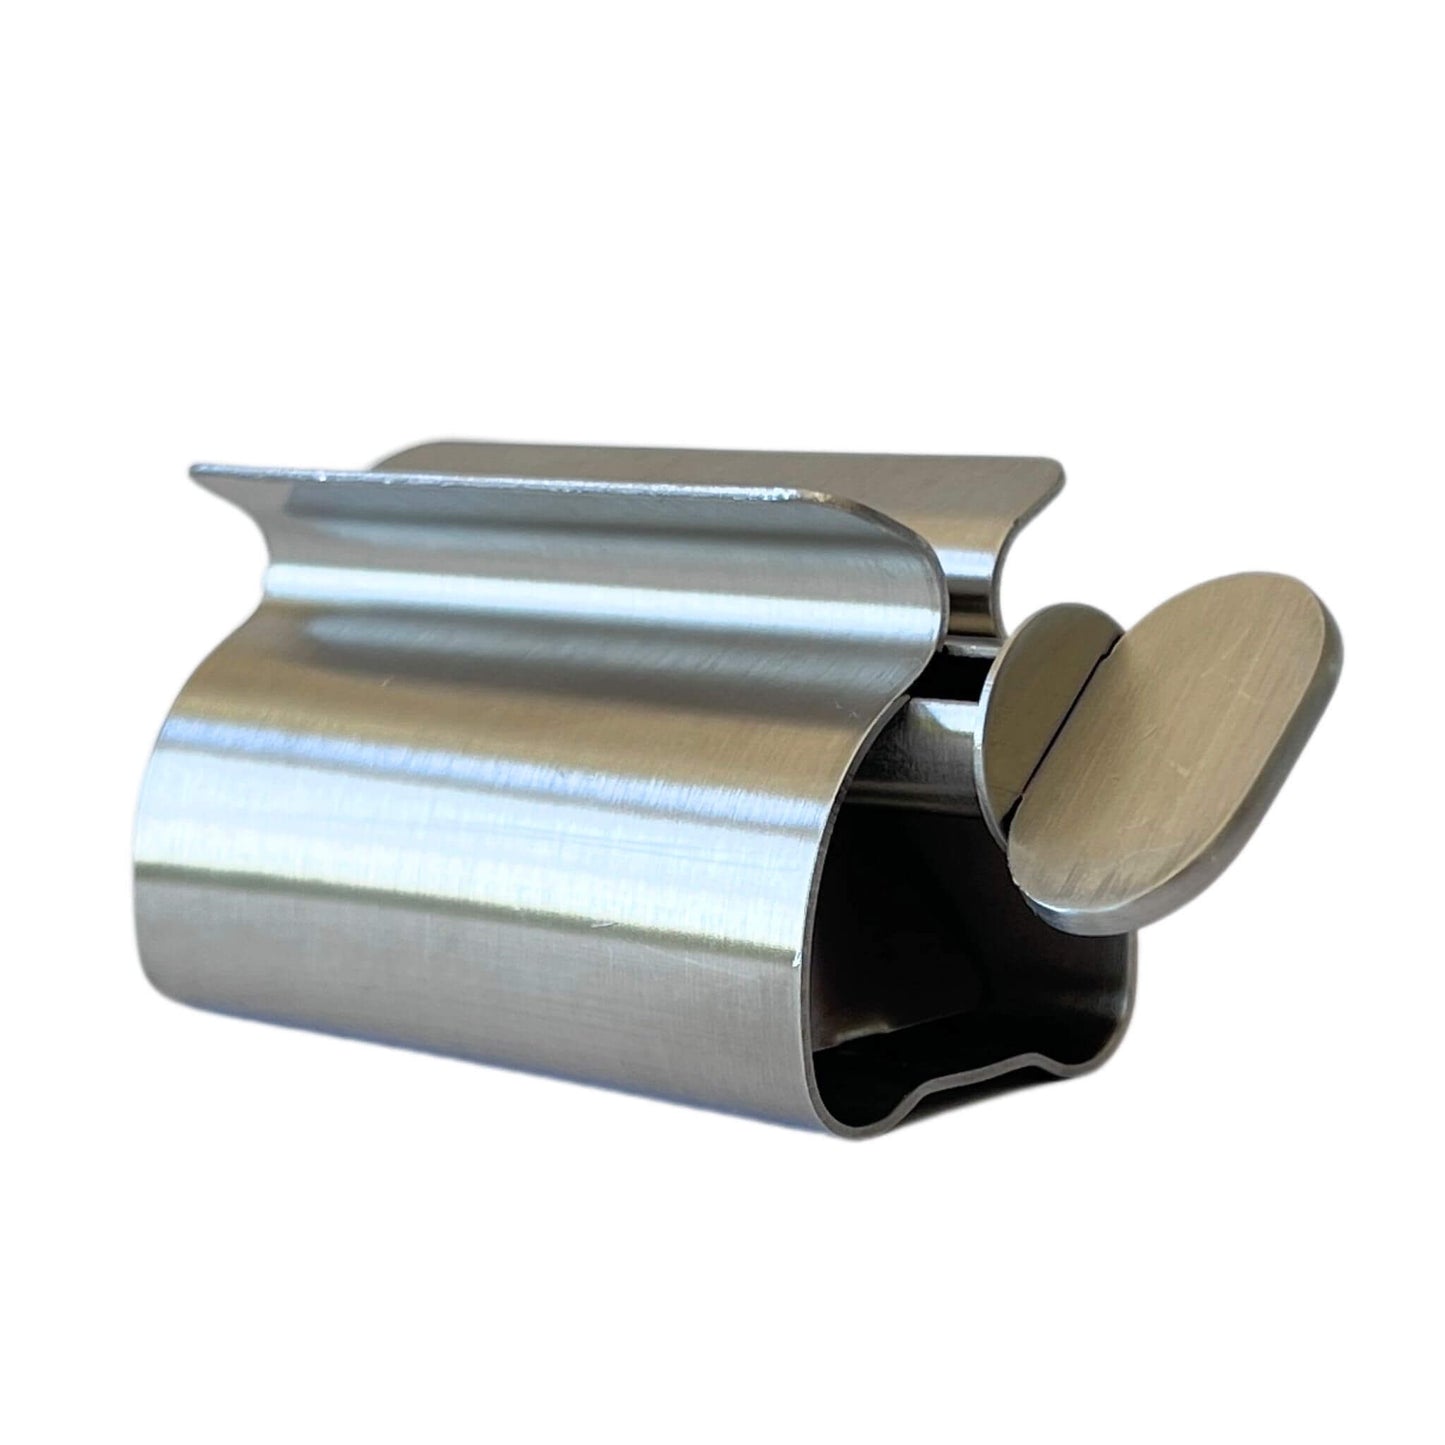 Stainless Steel Tube Squeezer